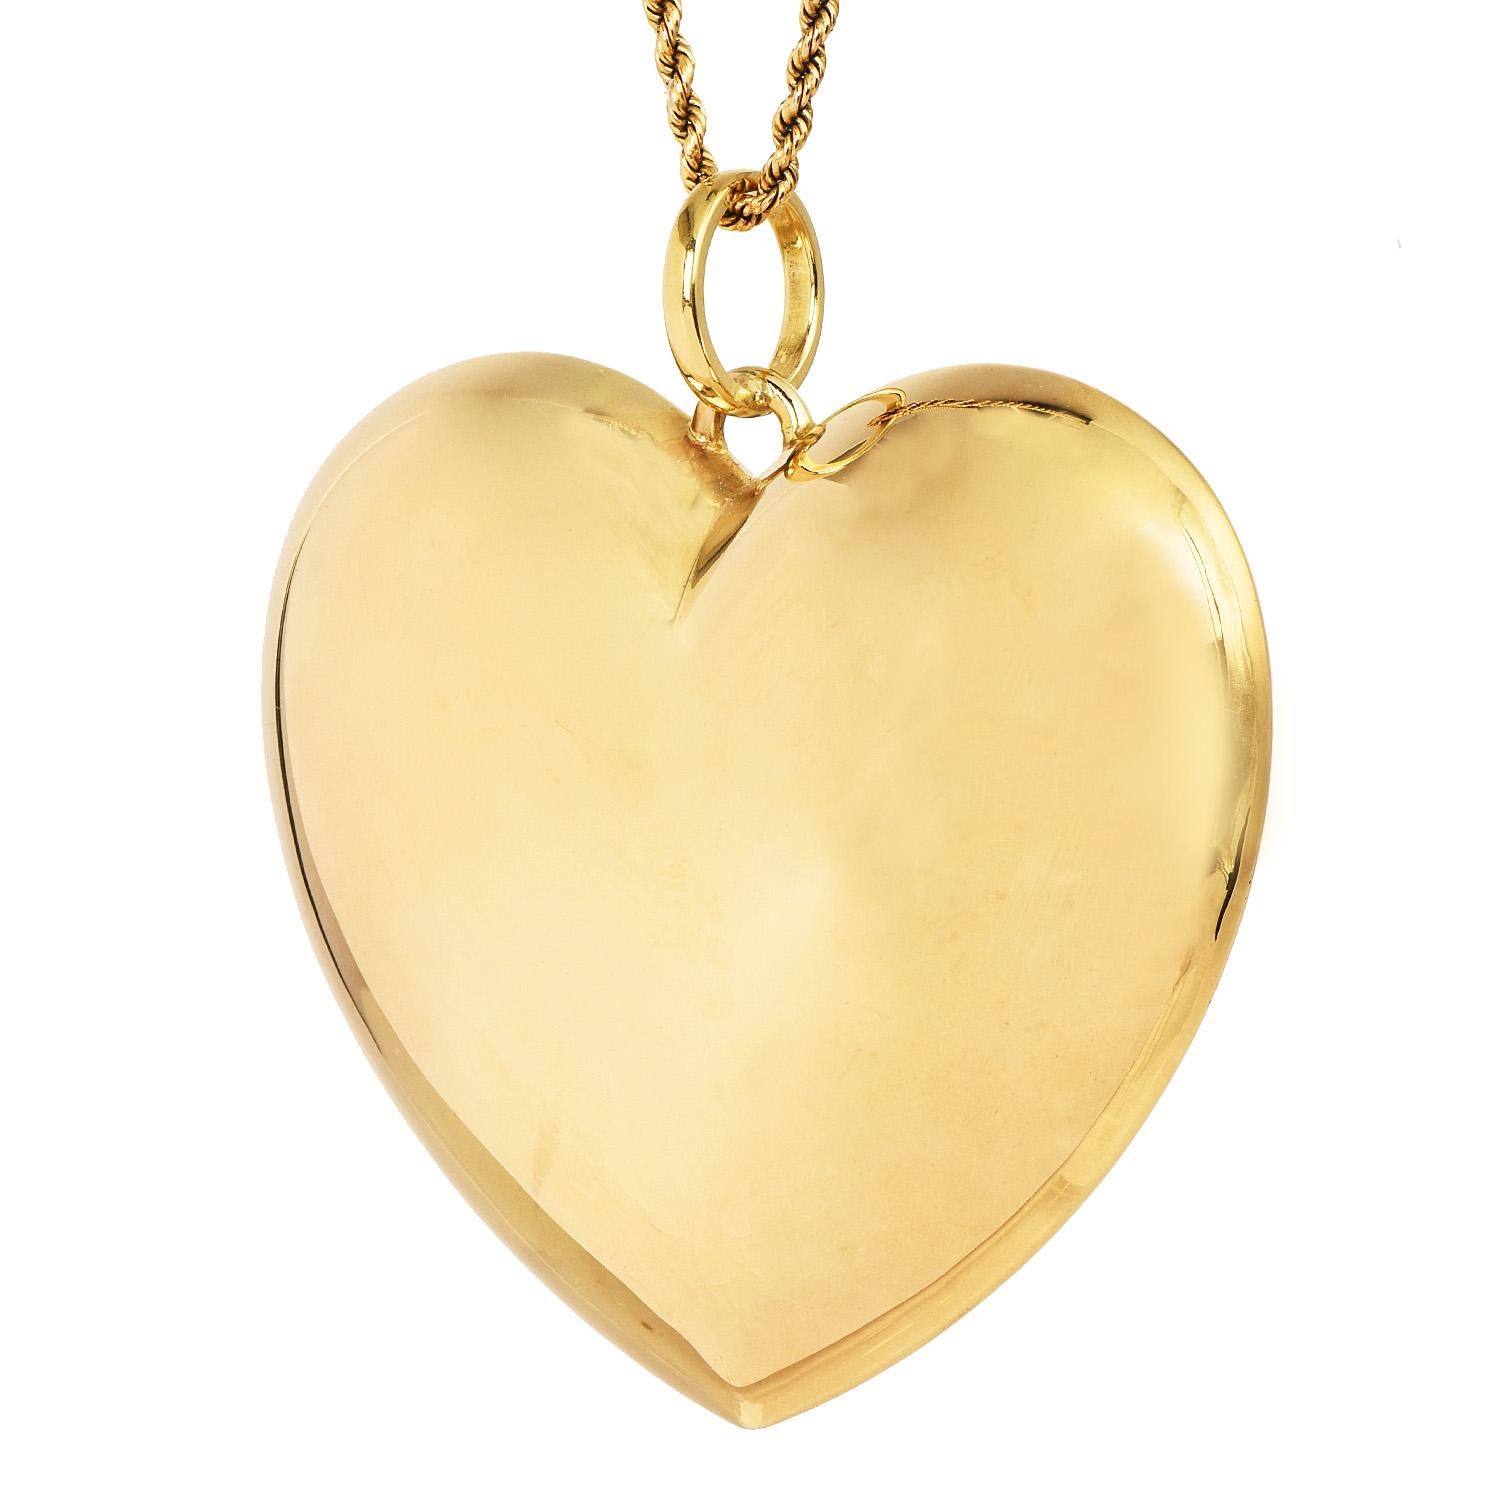 How big is your love?

Showing a magnificent & romantic theme, this Retro pendant is inspired on a big heart, simple yet so unique.

Crafted in  18K yellow gold, finished in a high polished mirror-like gold.

The complete piece measures